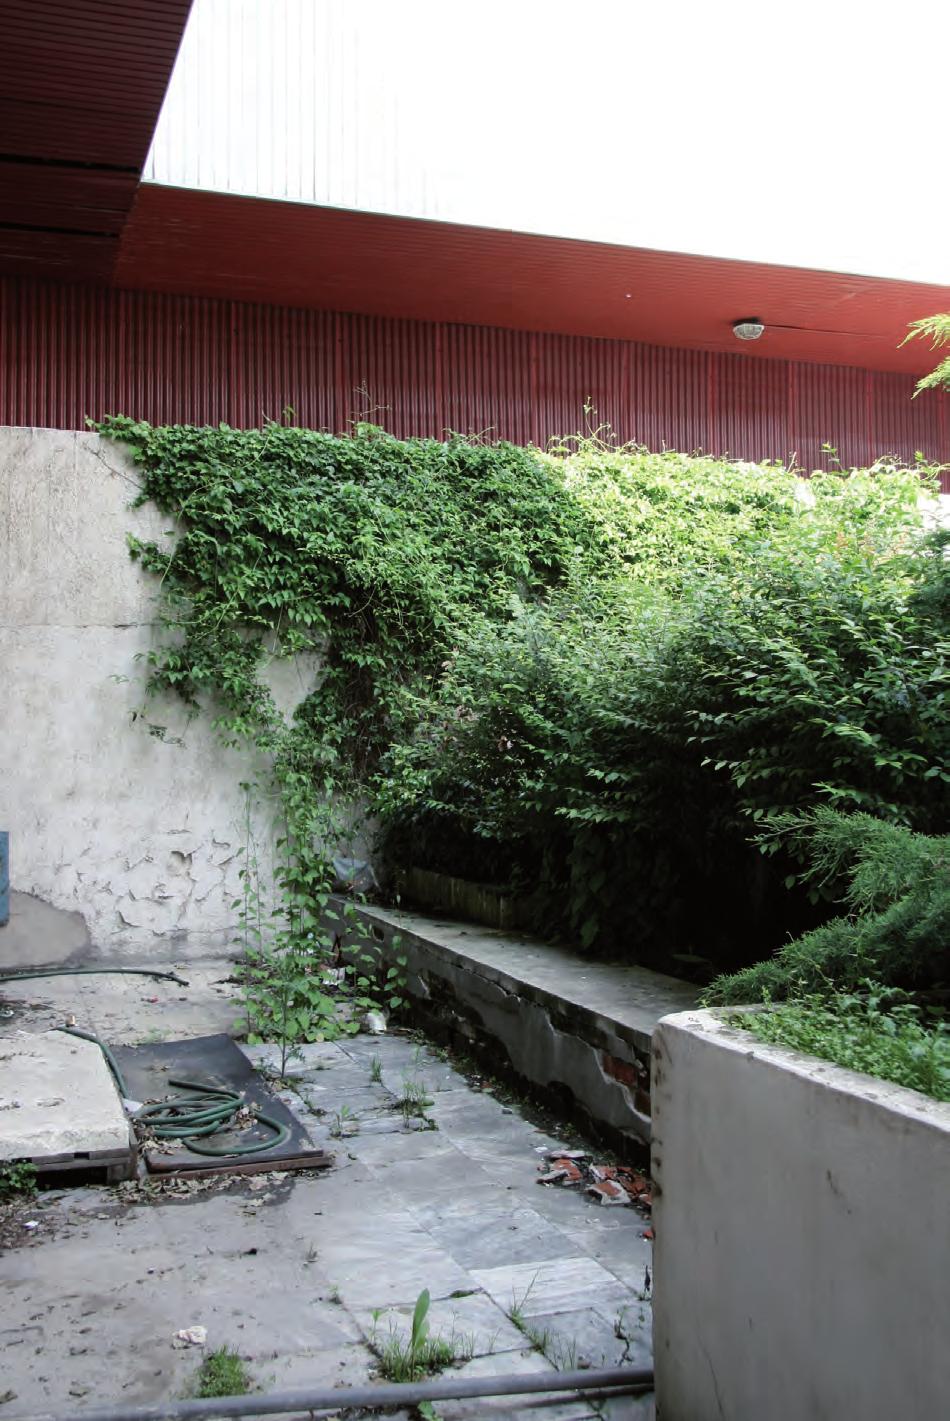 The garden was planned to continue into the space under the administration building under the bridge or corridor which is here seen with the red